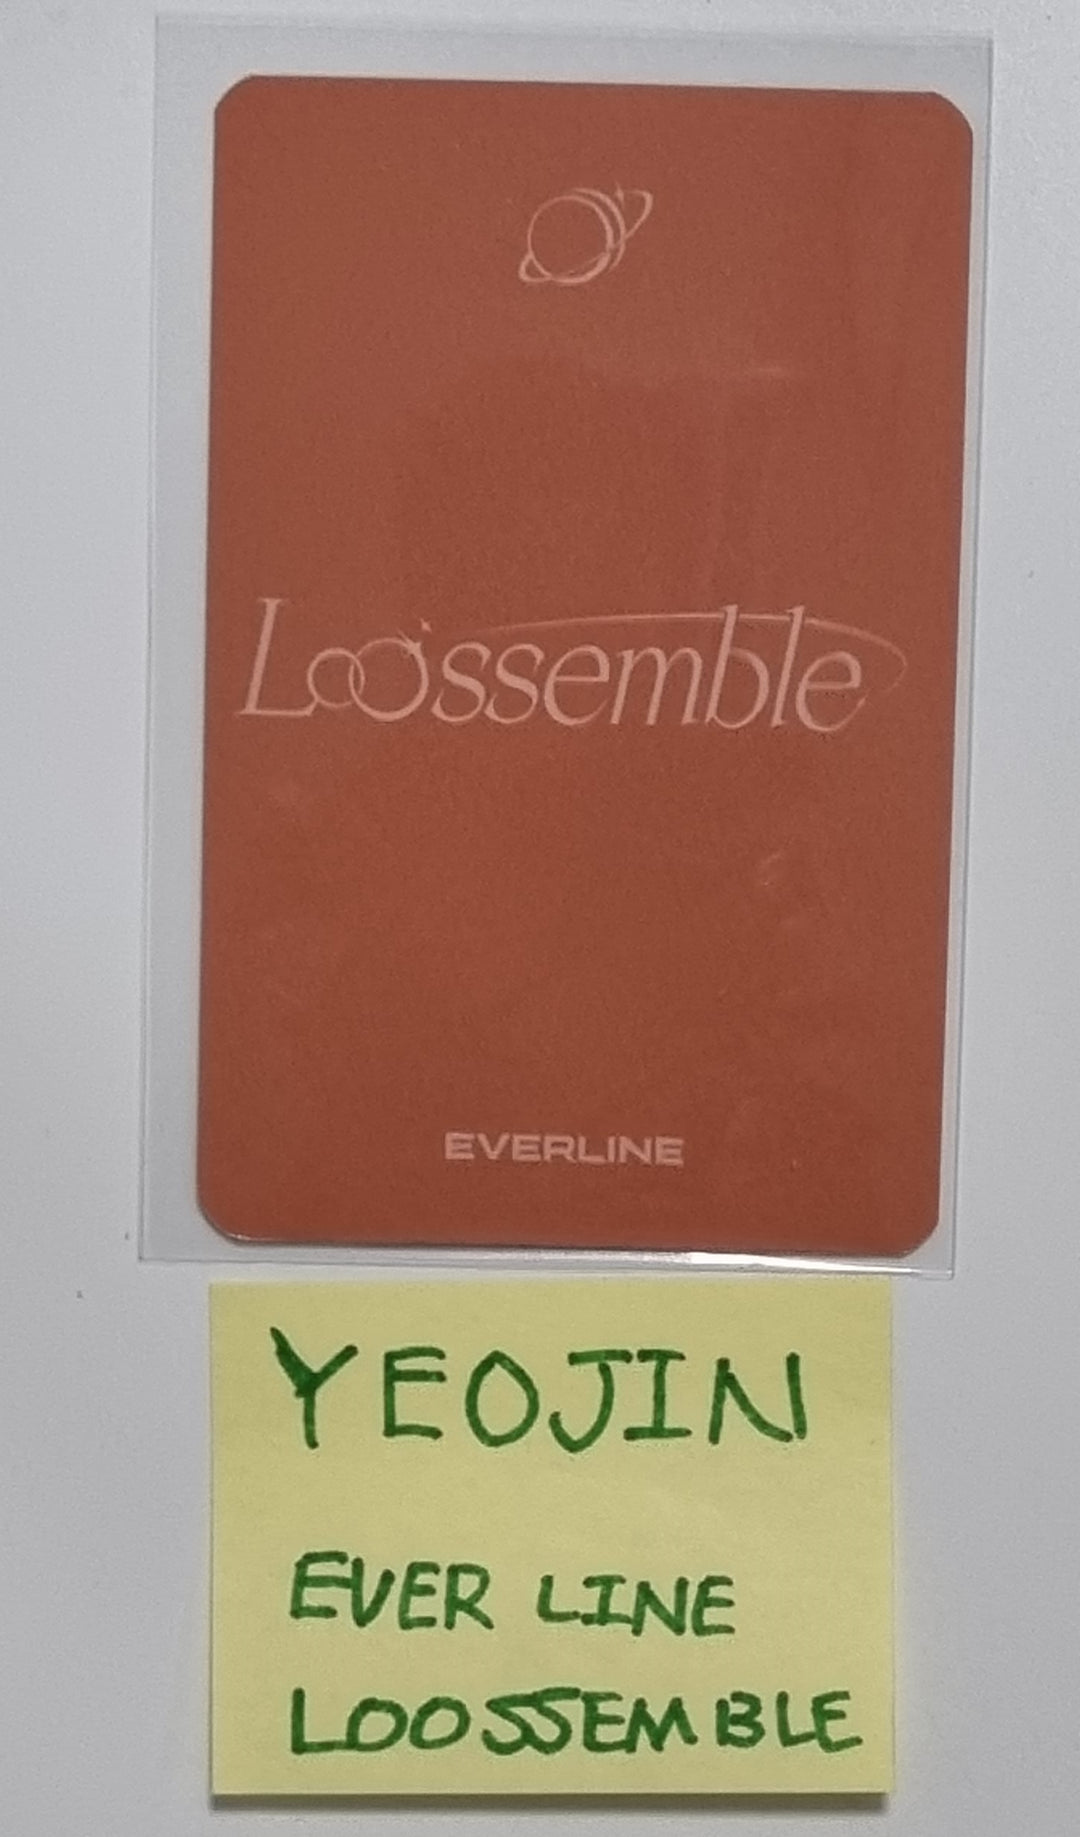 Yeojin (Of Loossemble) "Loossemble" - Hand Autographed(Signed) Photocard [23.12.07]